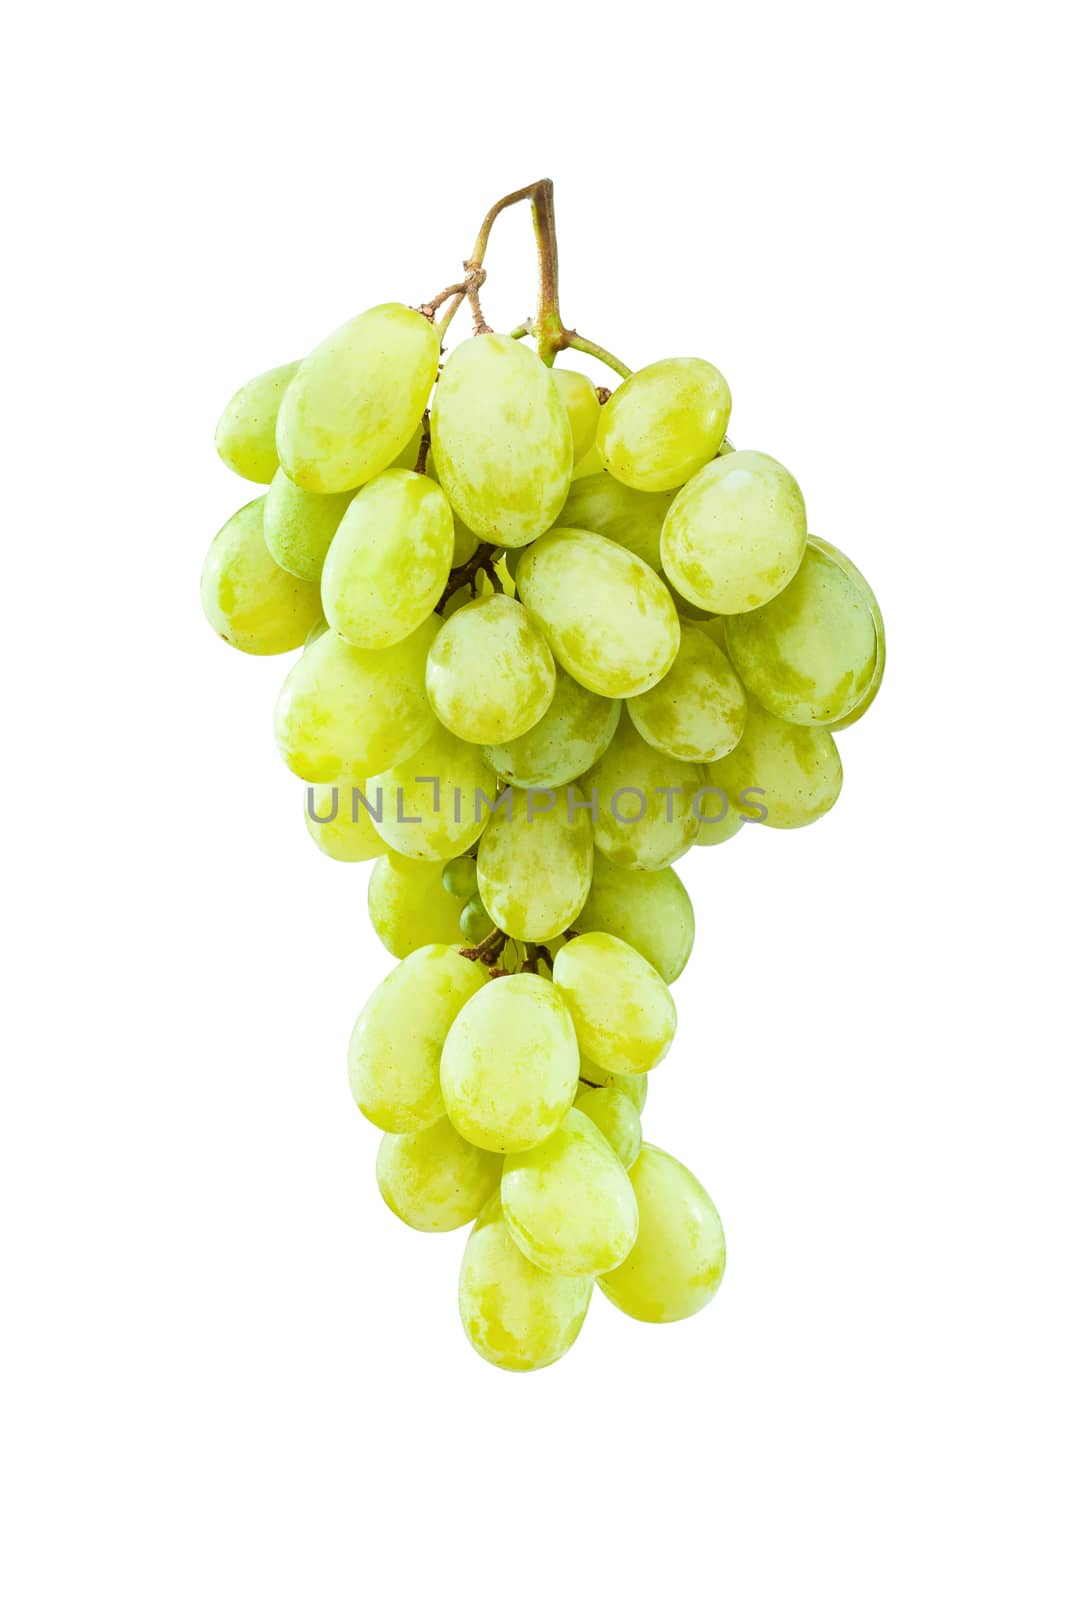 Ripe green grapes hanging against white by kokimk